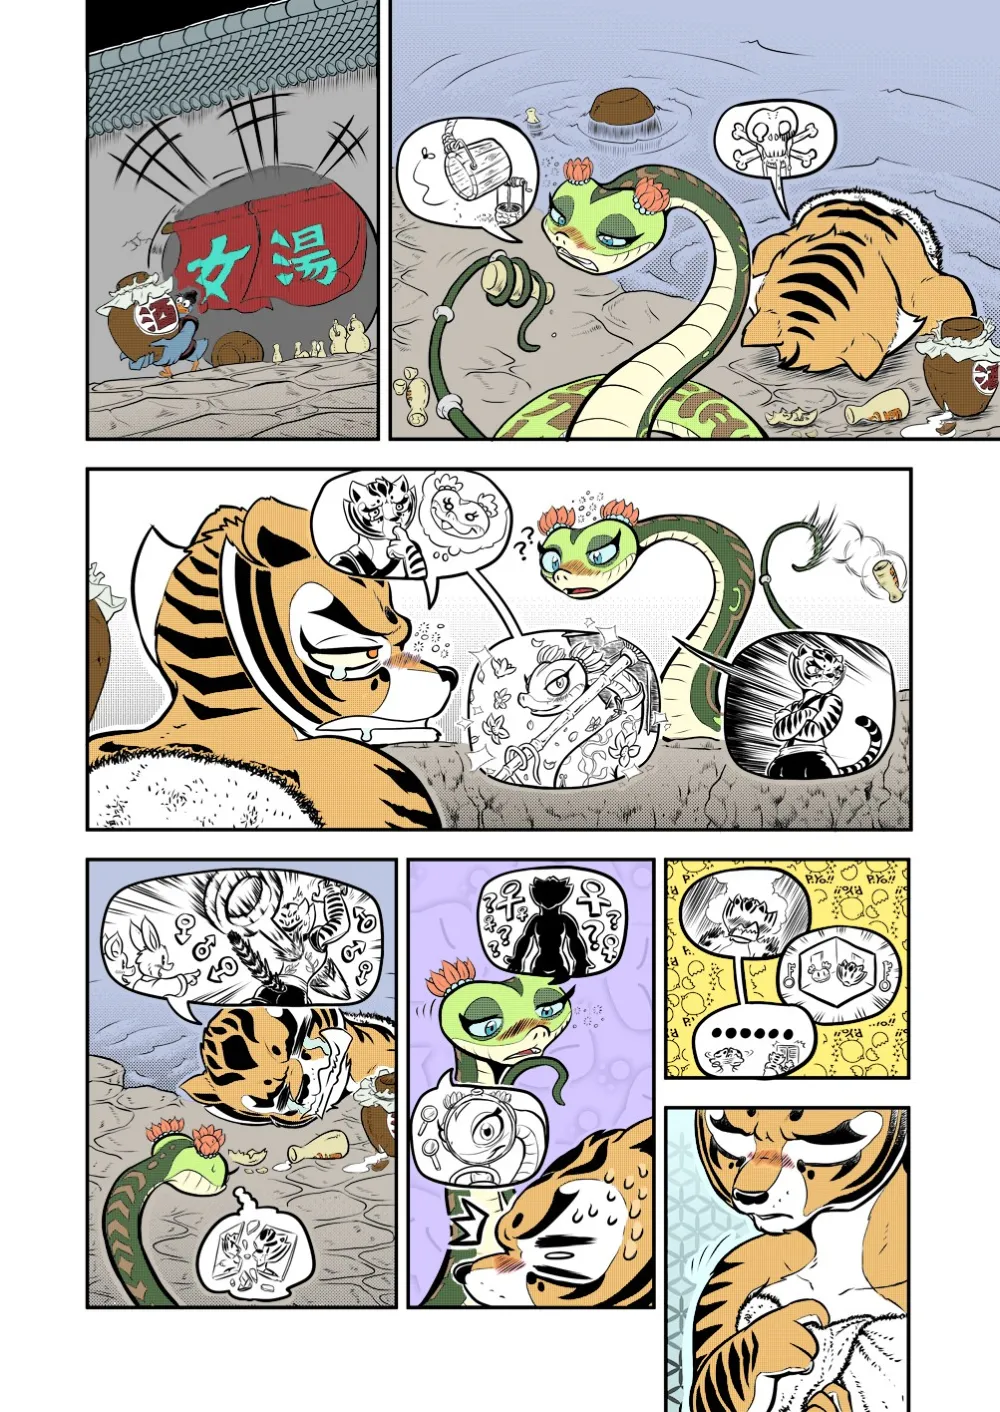 The Tiger Lilies in Bloom - Page 4